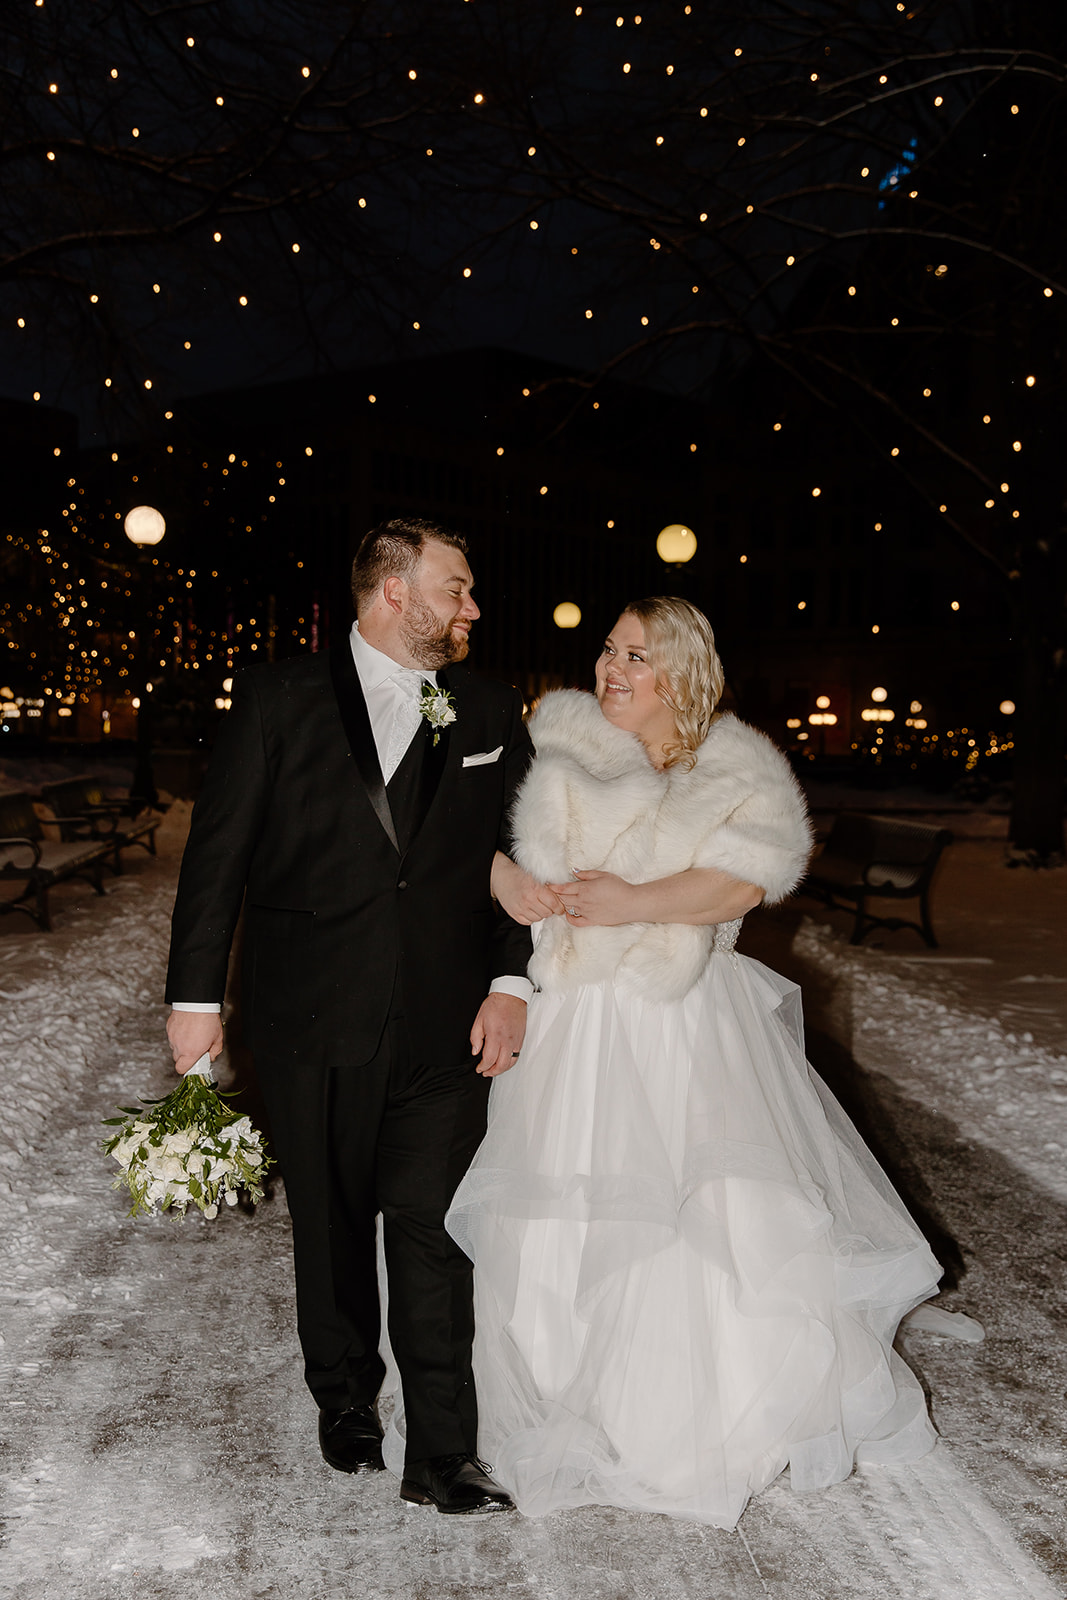 Bride and groom walking in a snowstorm